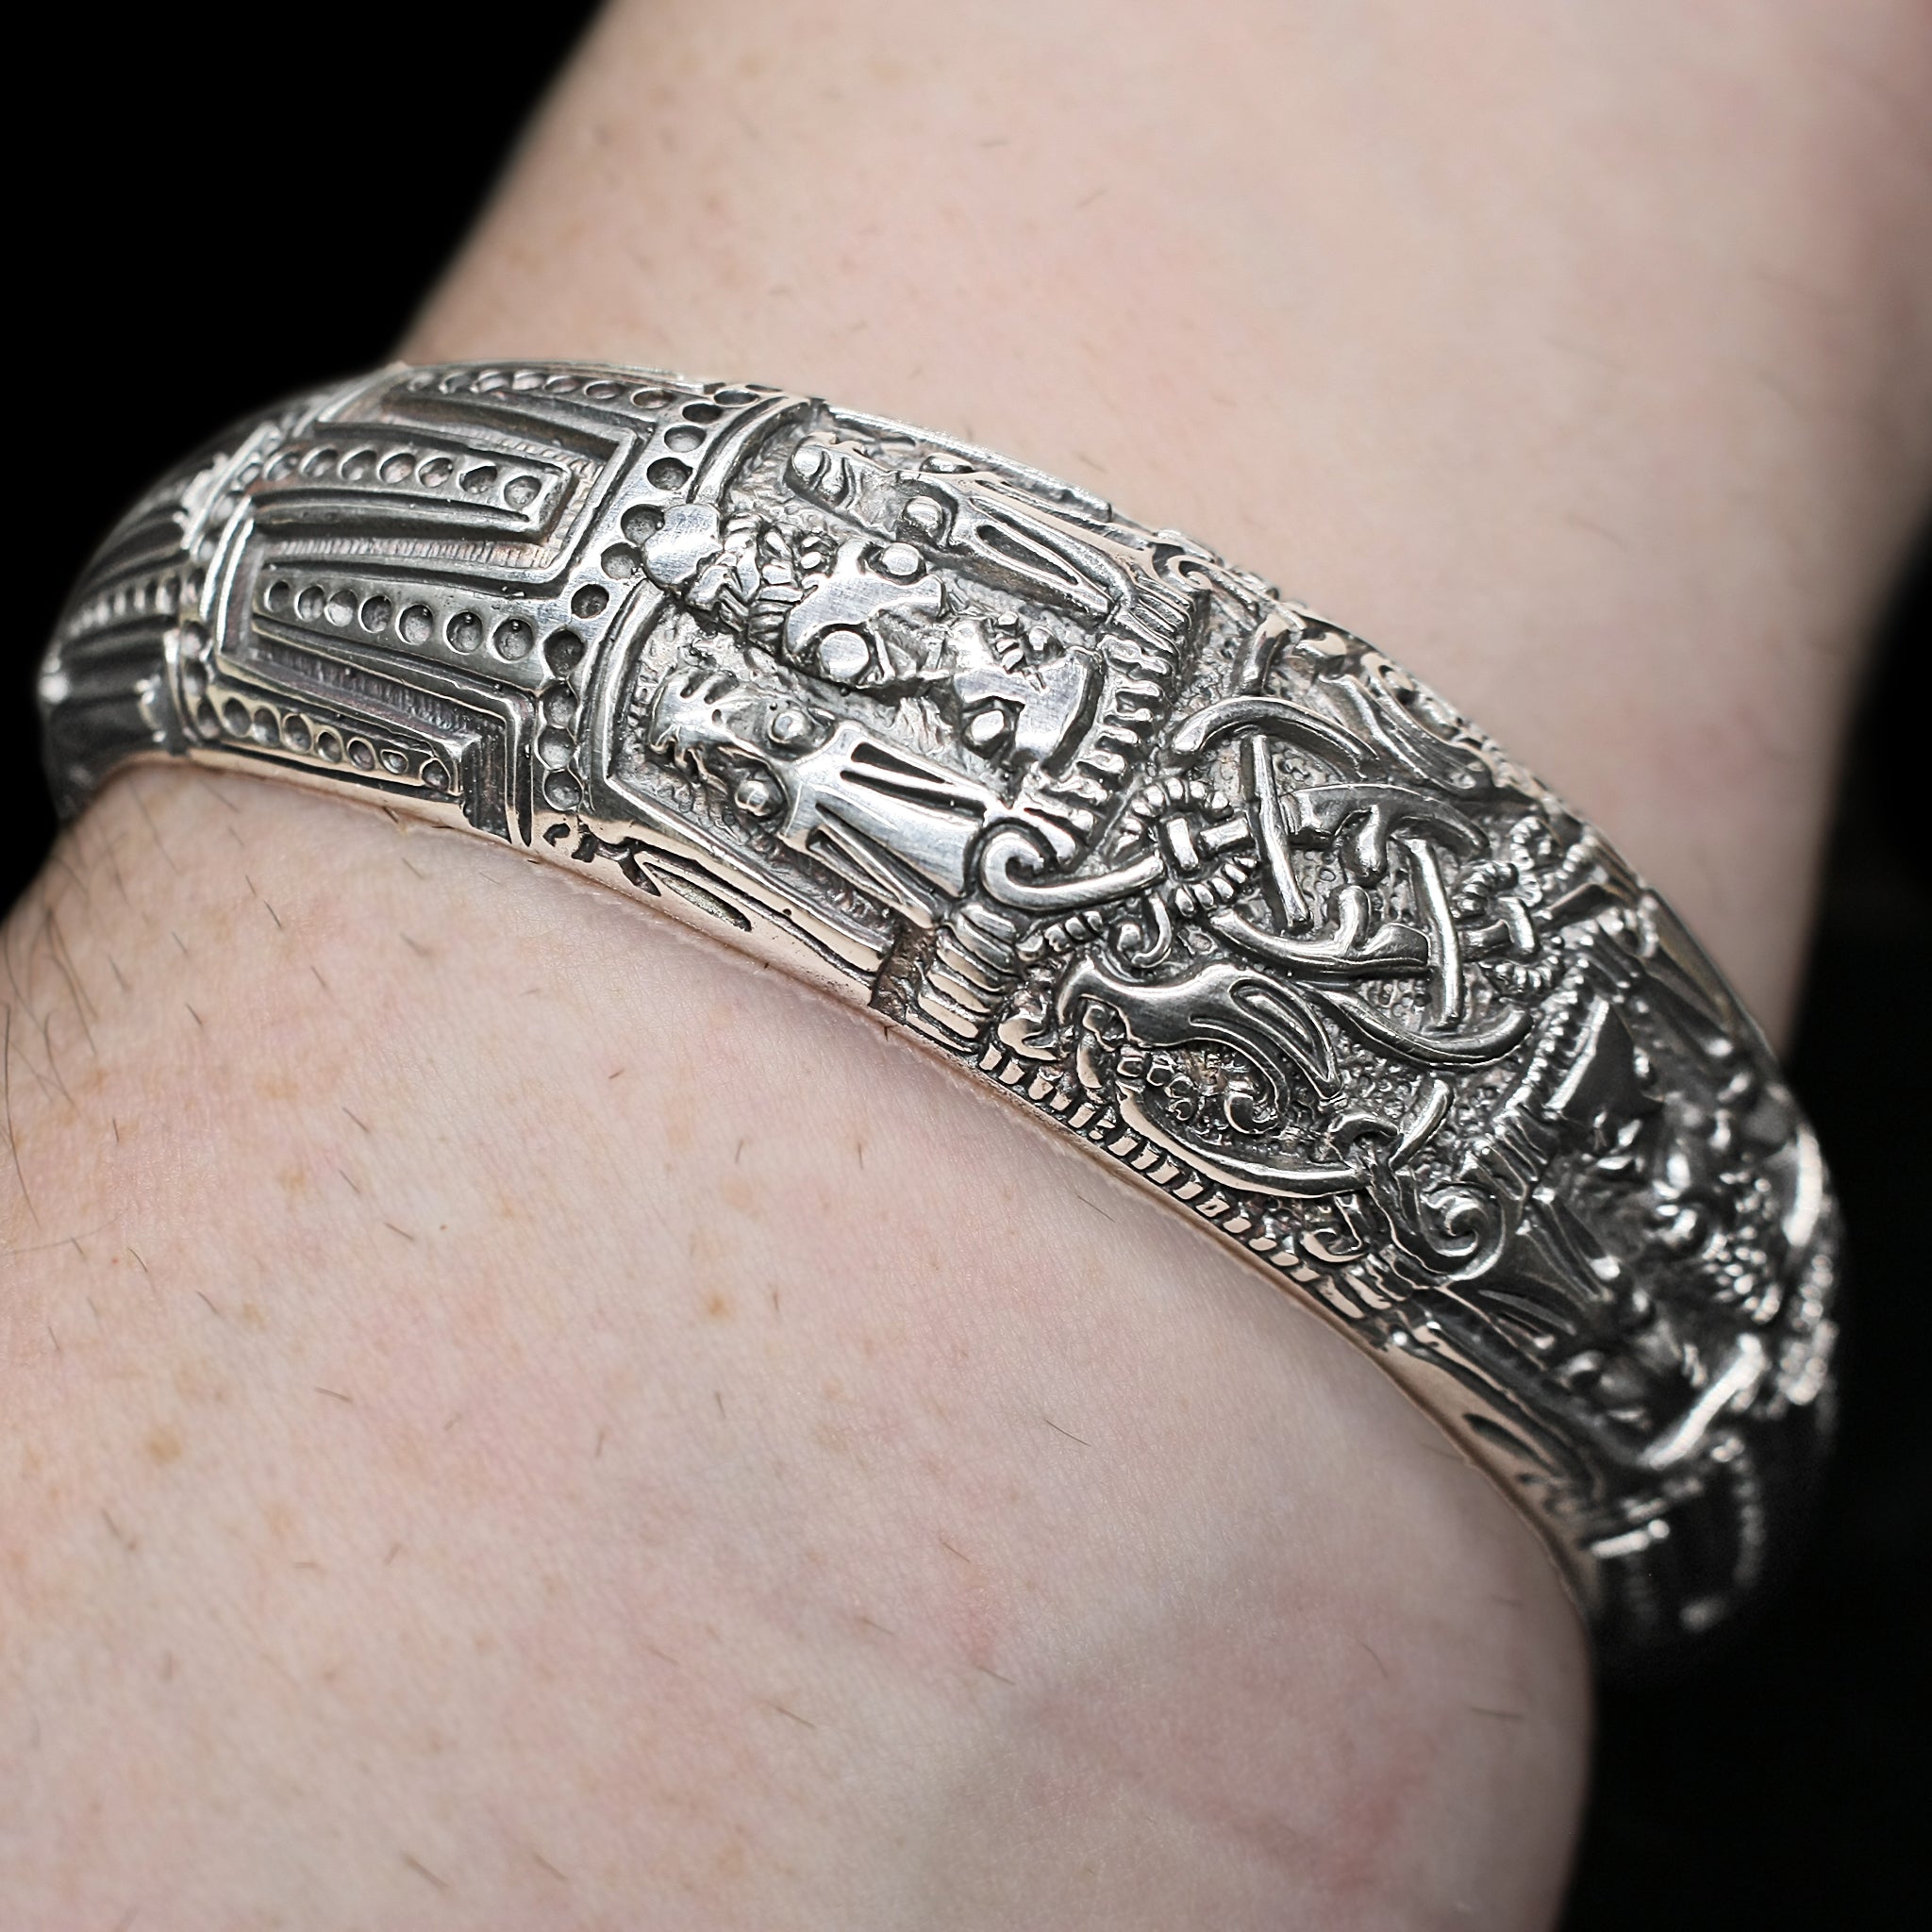 Silver Viking Arm Ring from Novgorod on Arm